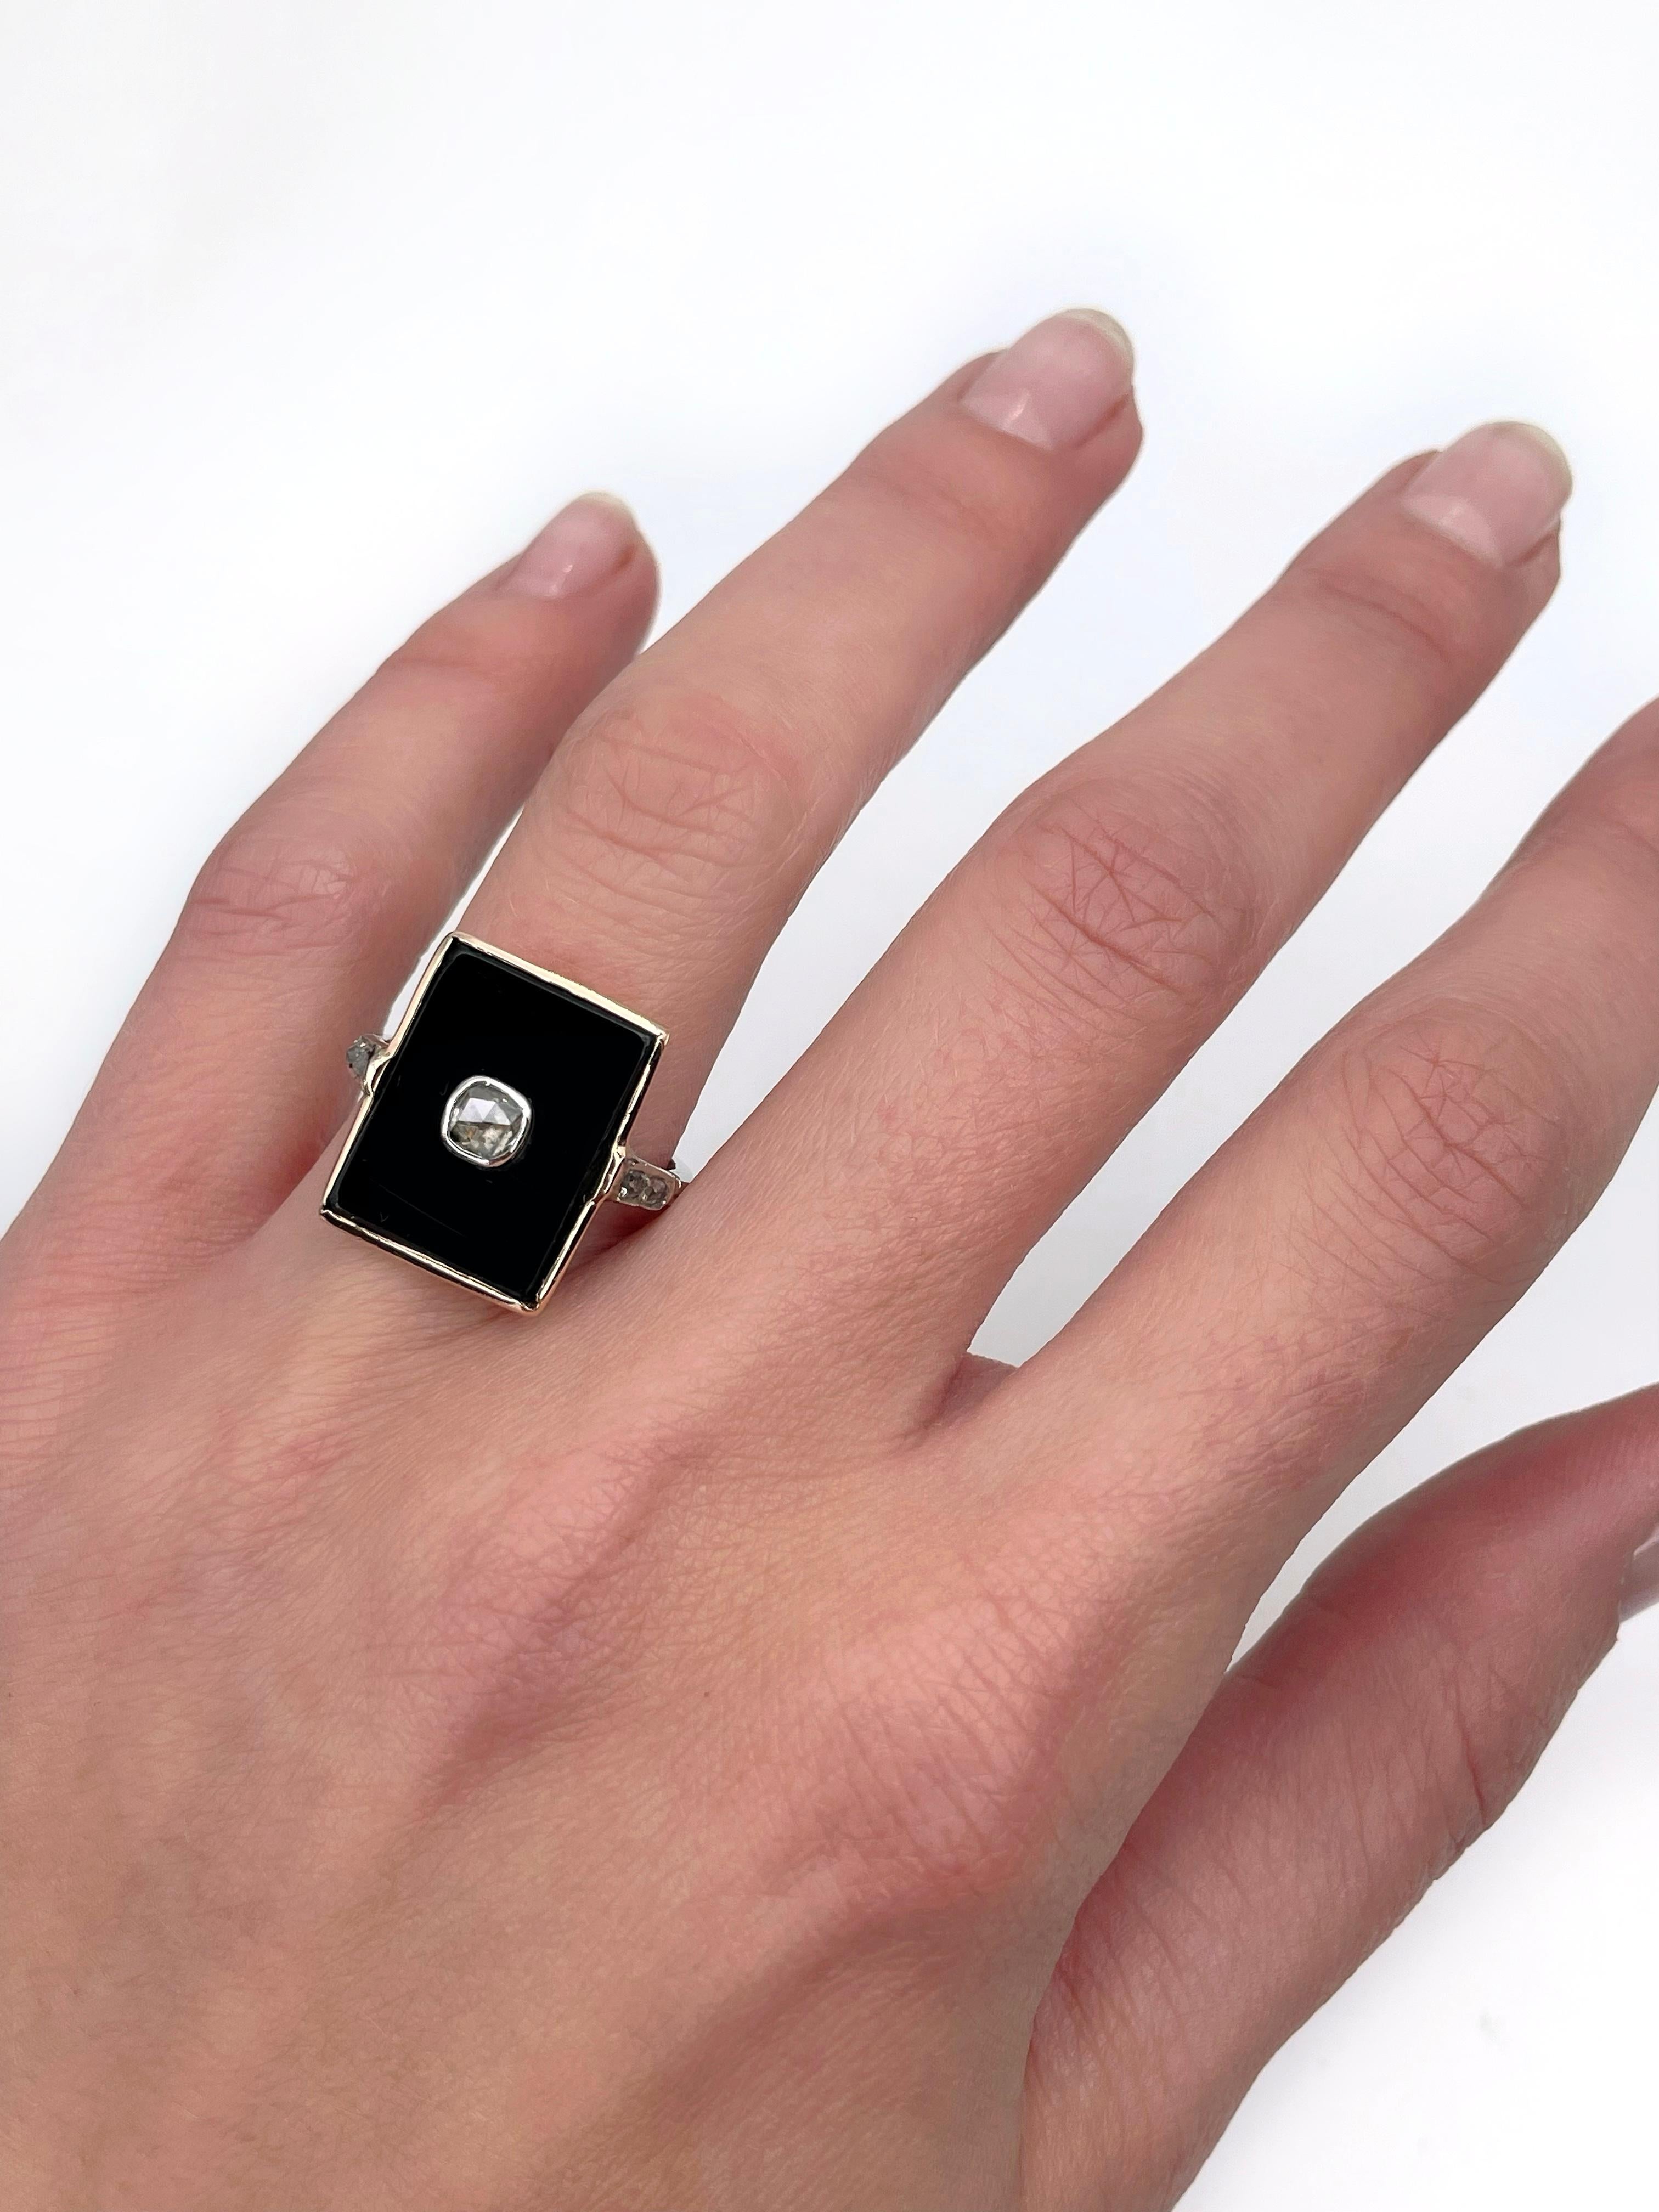 This is an amazing Victorian rectangle signet ring crafted in 18K gold. It features black onyx and rose cut diamonds.

Weight: 3.93g 
Size: 16.25 (US 5.5)

IMPORTANT: please ask about the possibility to resize before purchase. This process takes 2-7